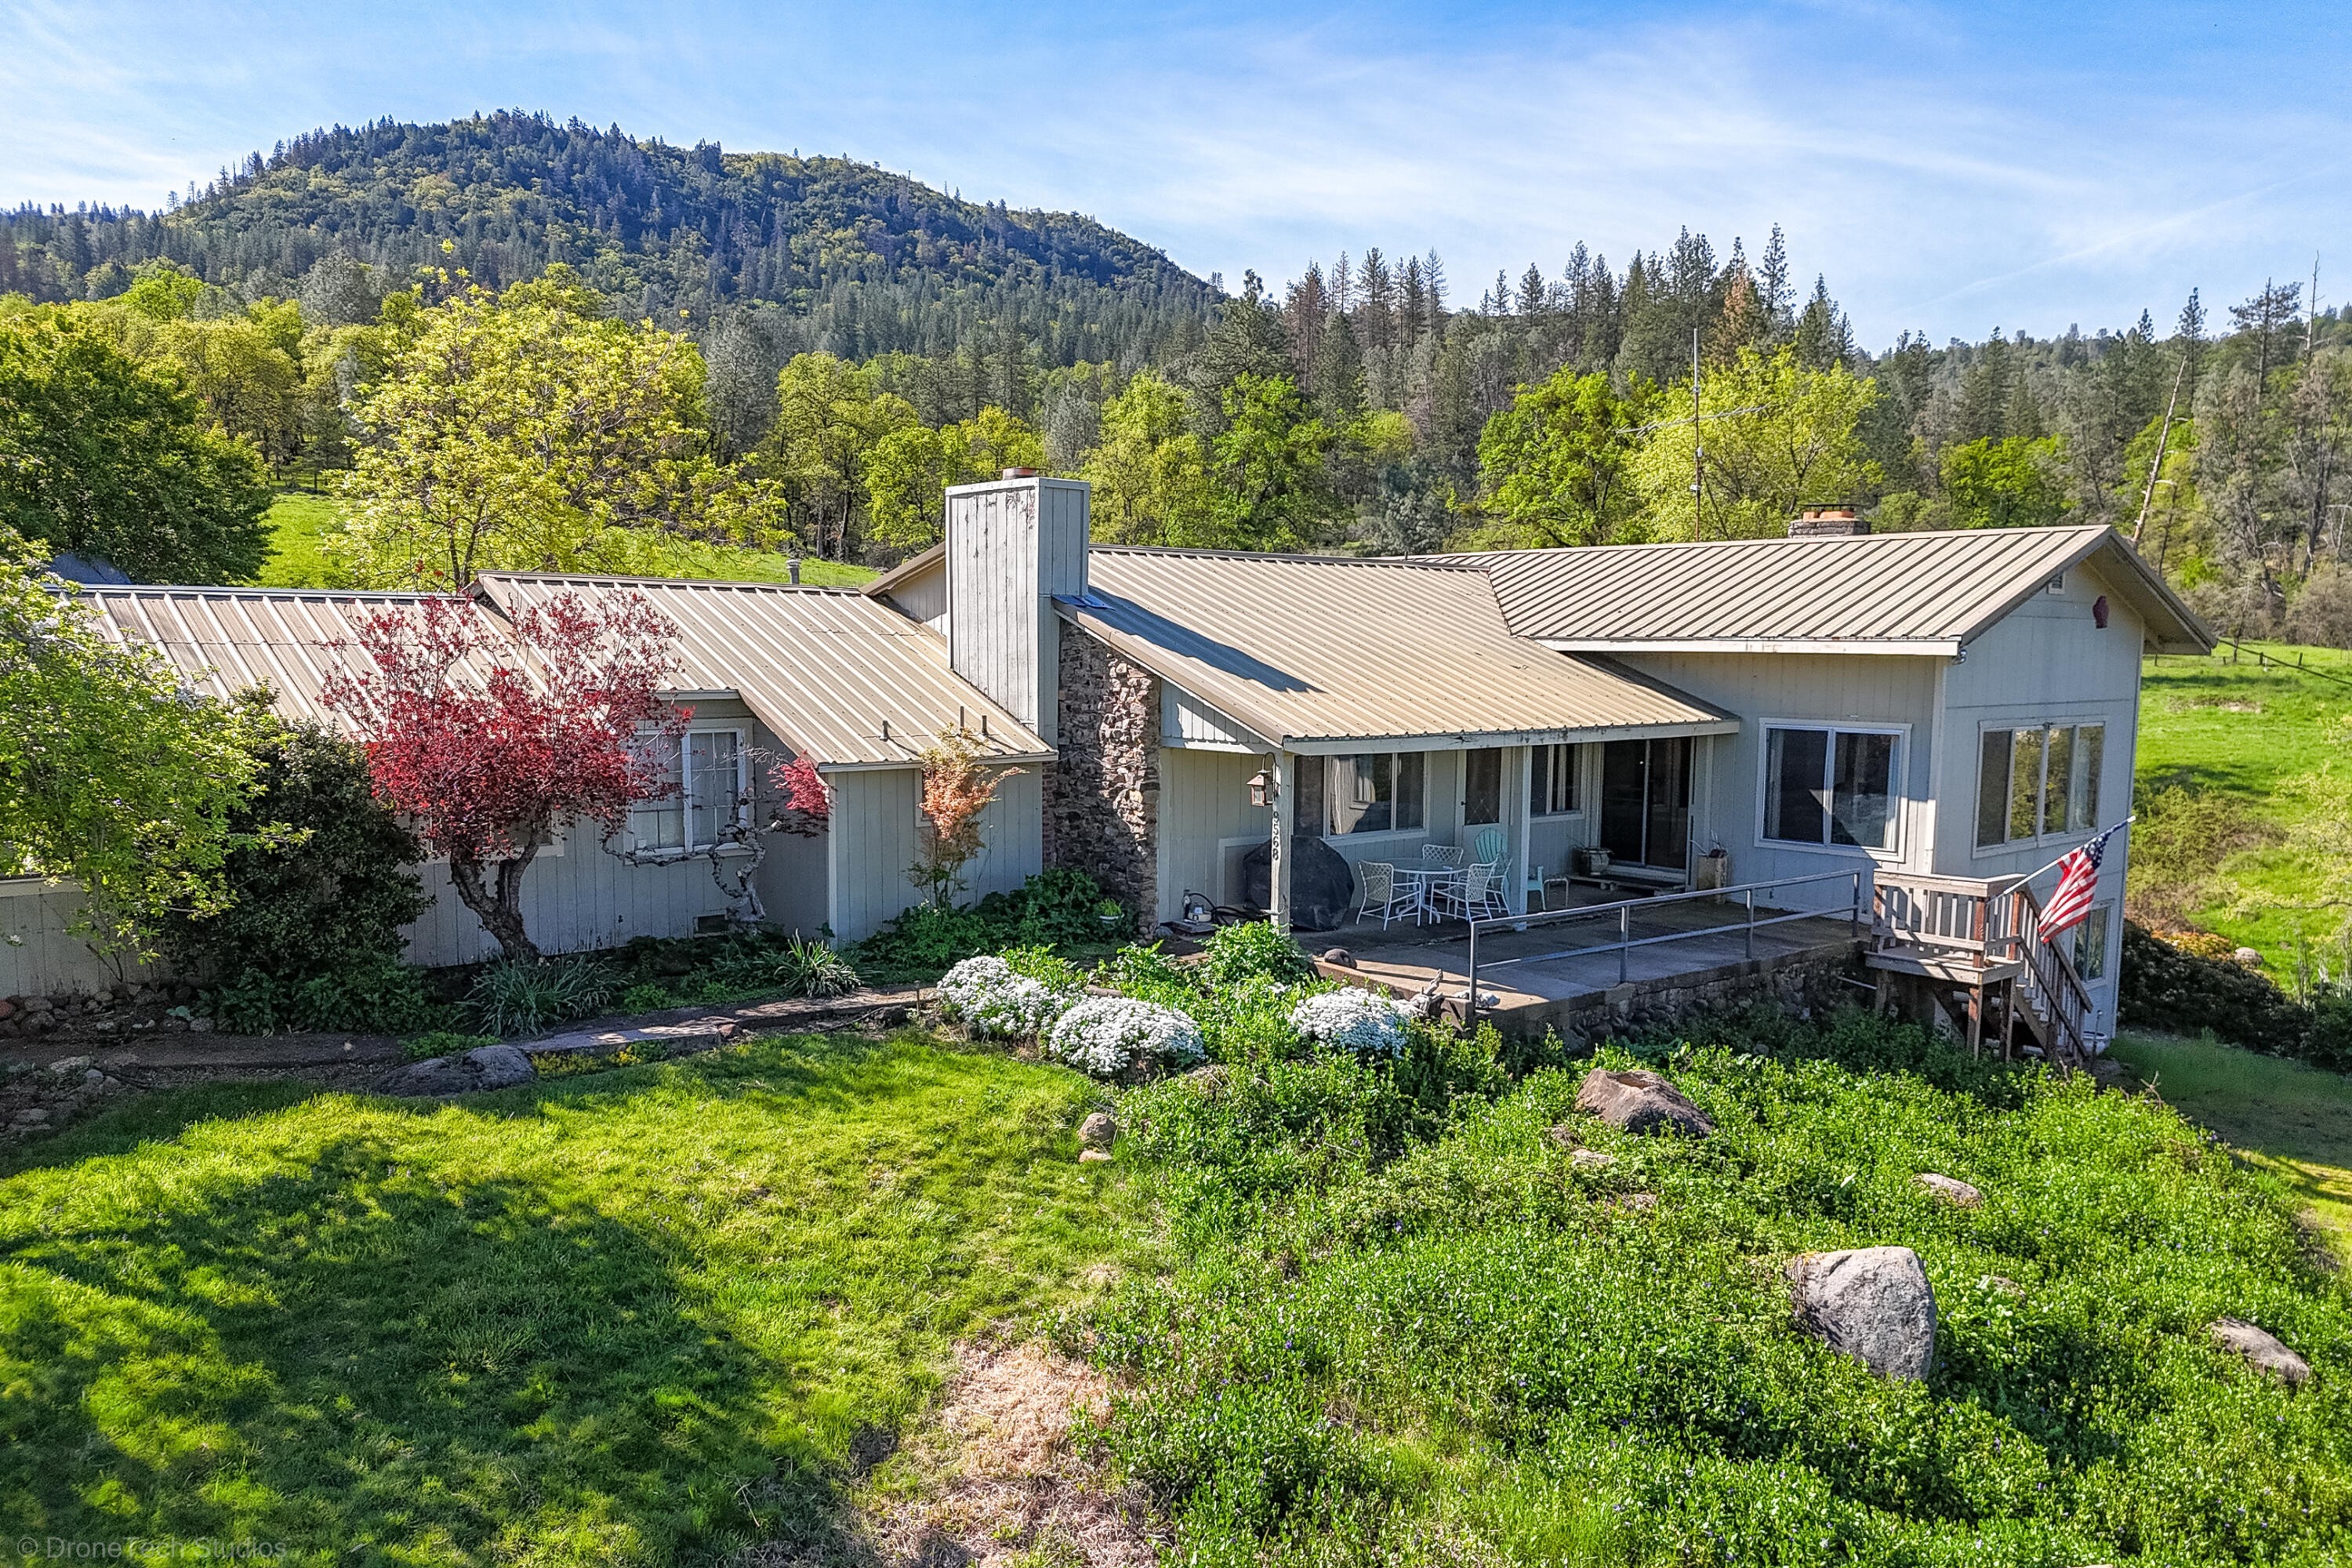 15. 9568 Blue Mountain Ranch Road